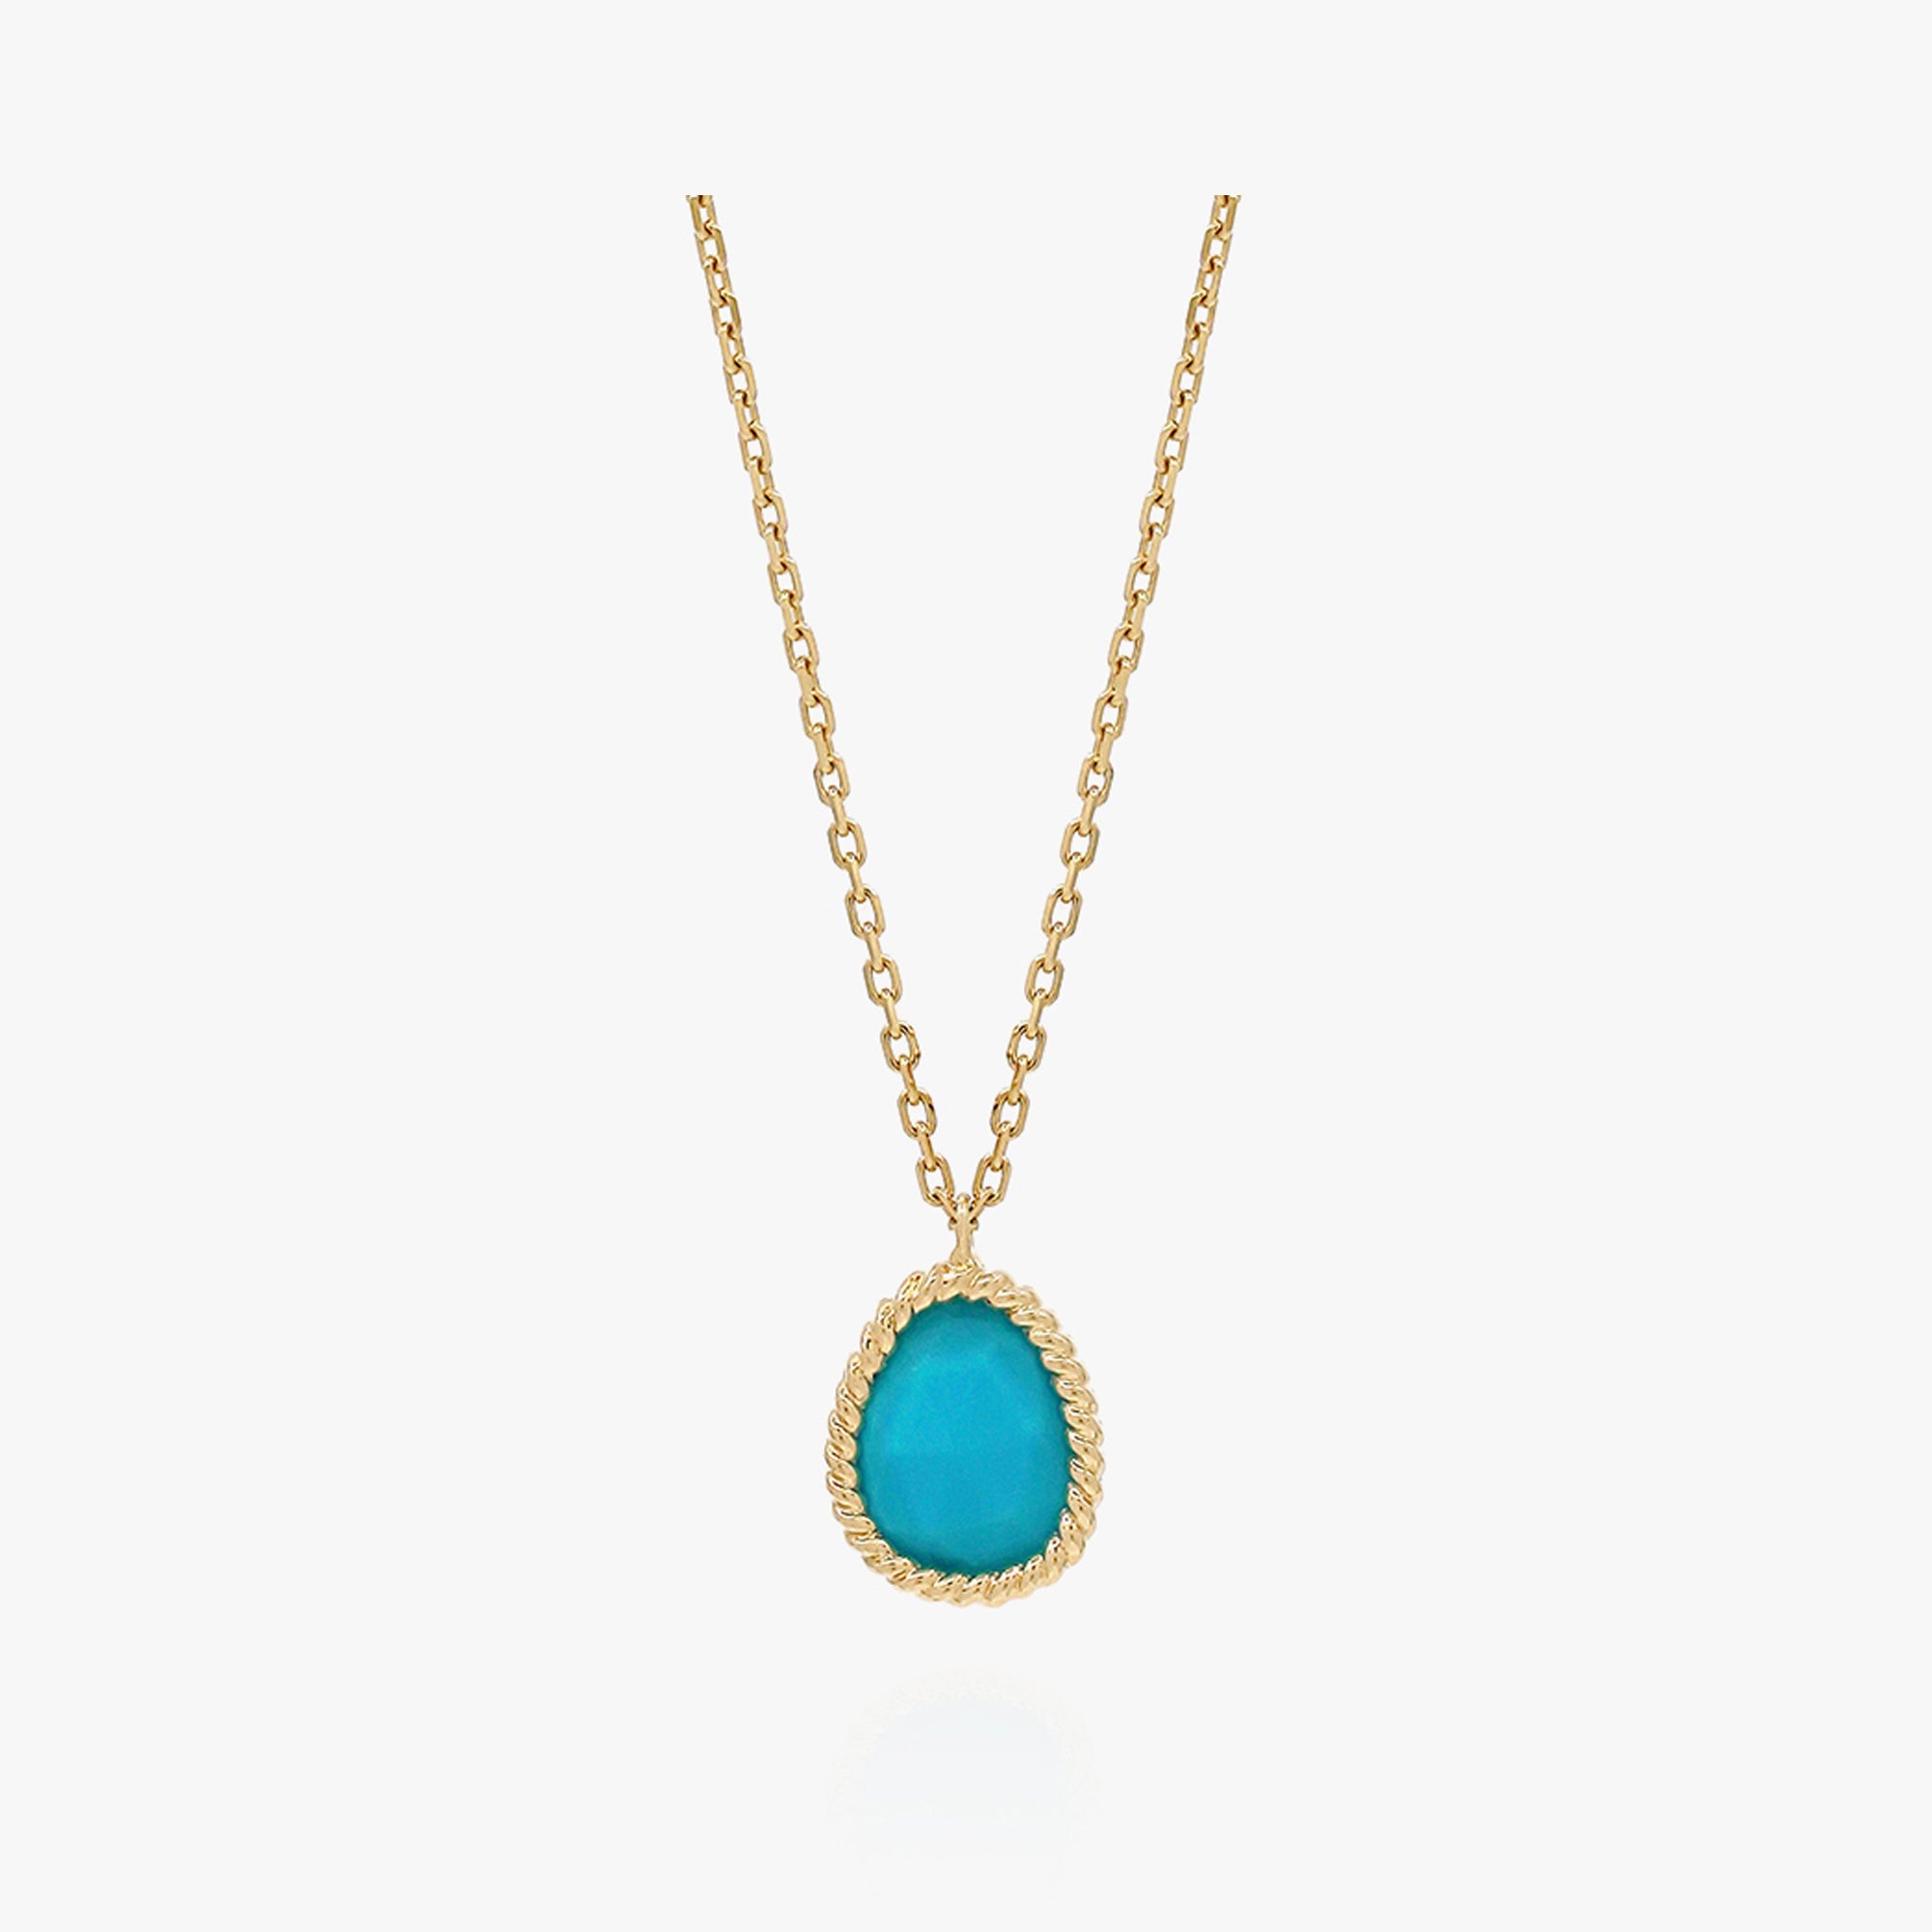 Nina Mariner Necklace In 18 Karat Yellow Gold With Petite Turquoise Stone